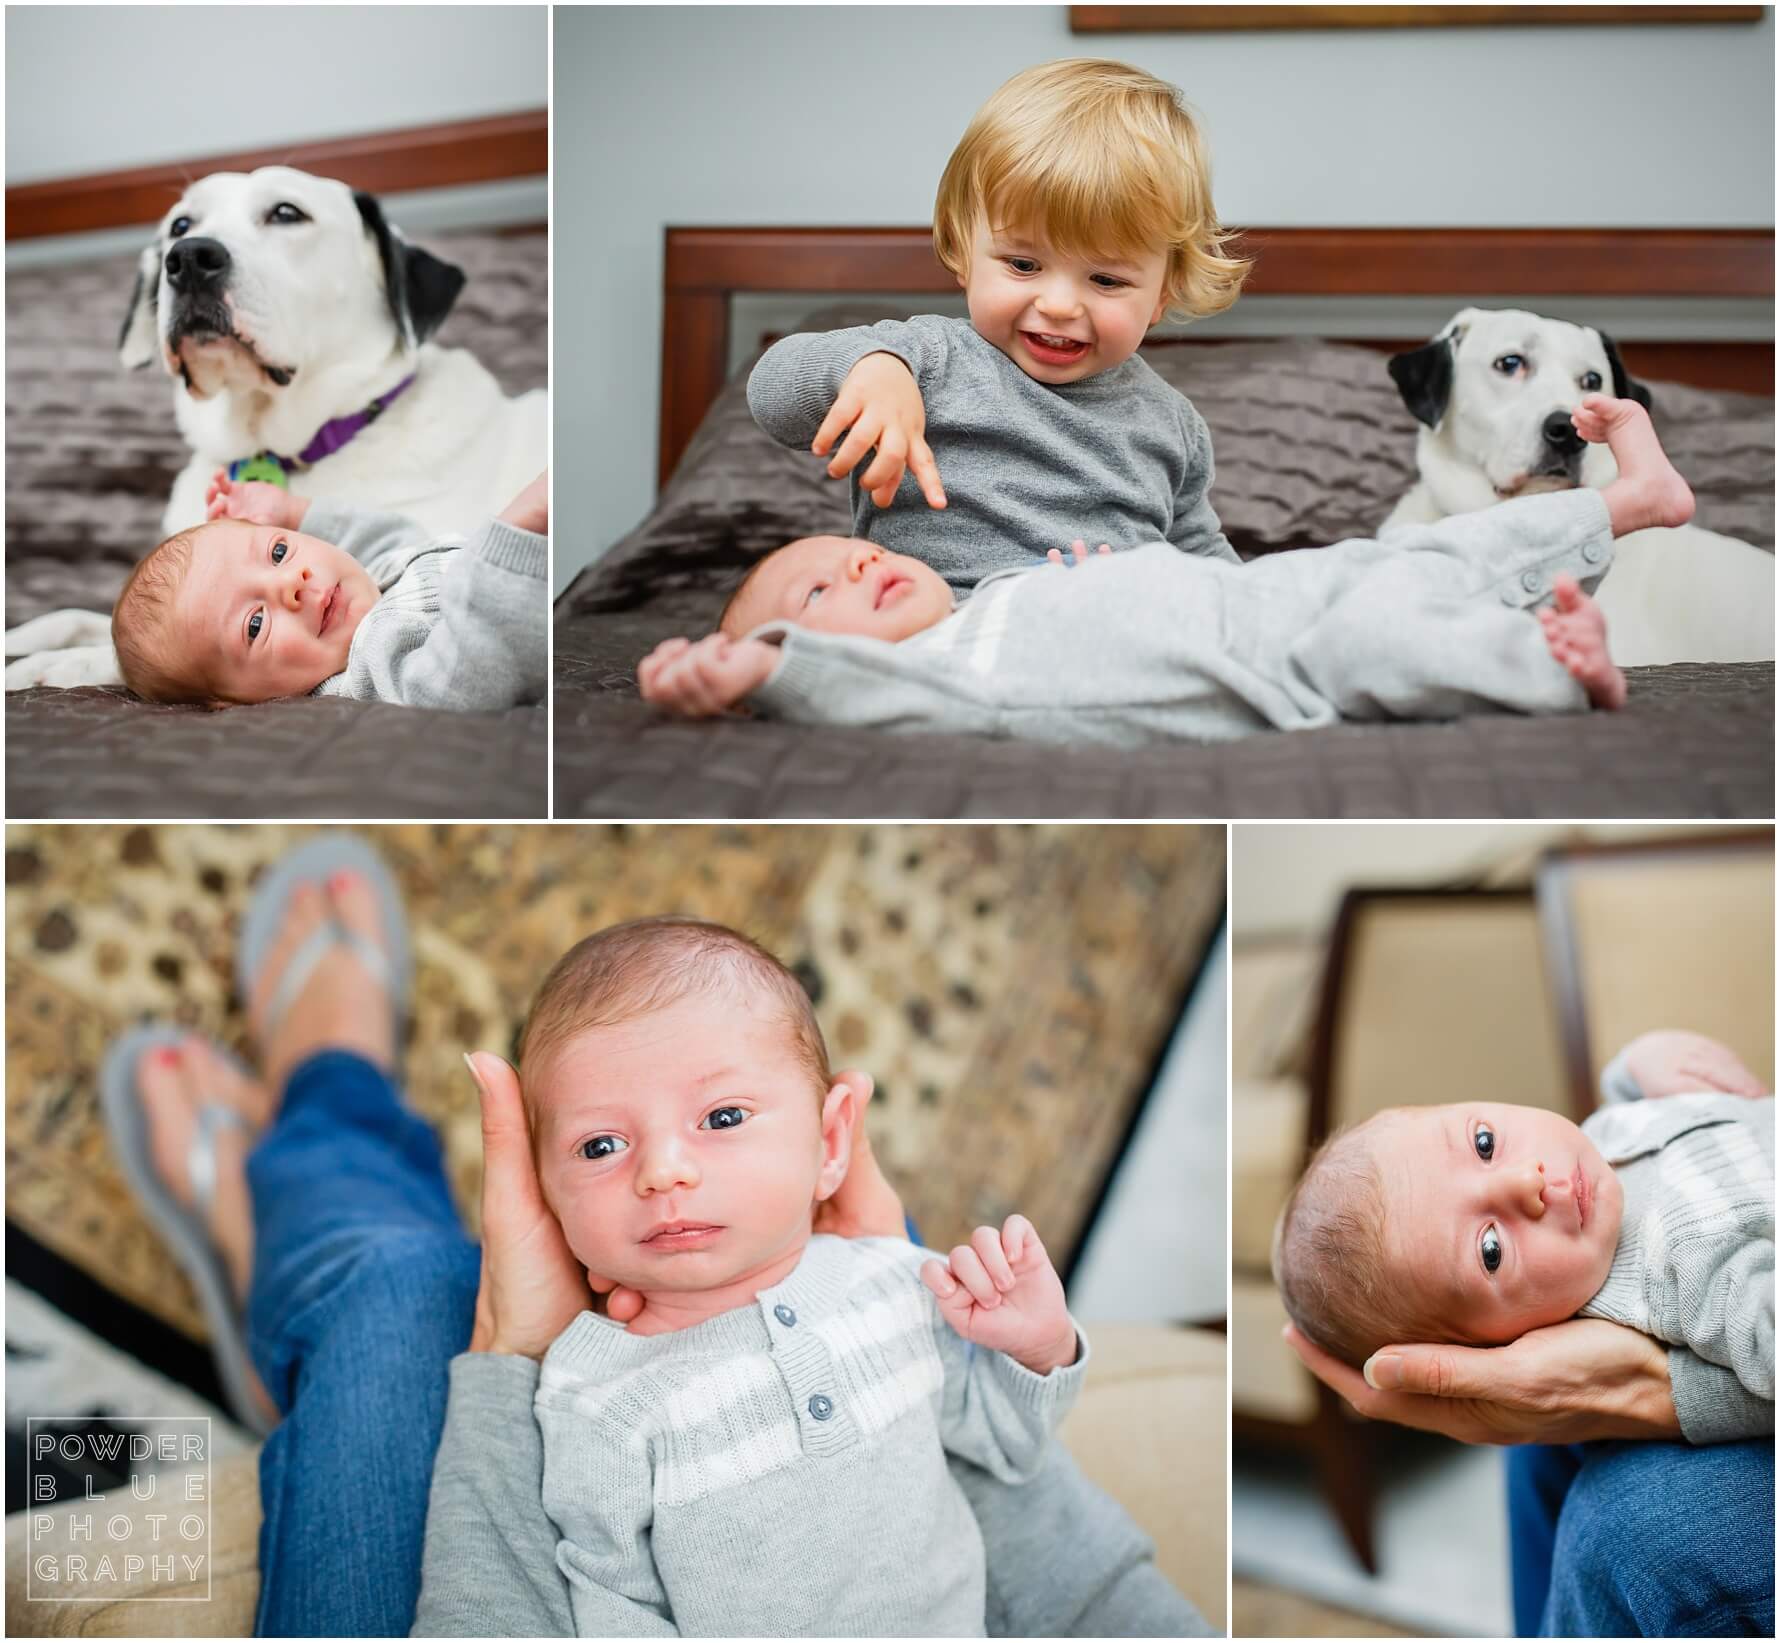 Pittsburgh newborn photographer. lifestyle images of newborn baby with brother and dog. pittsburgh lifestyle newborn photography session in home. 